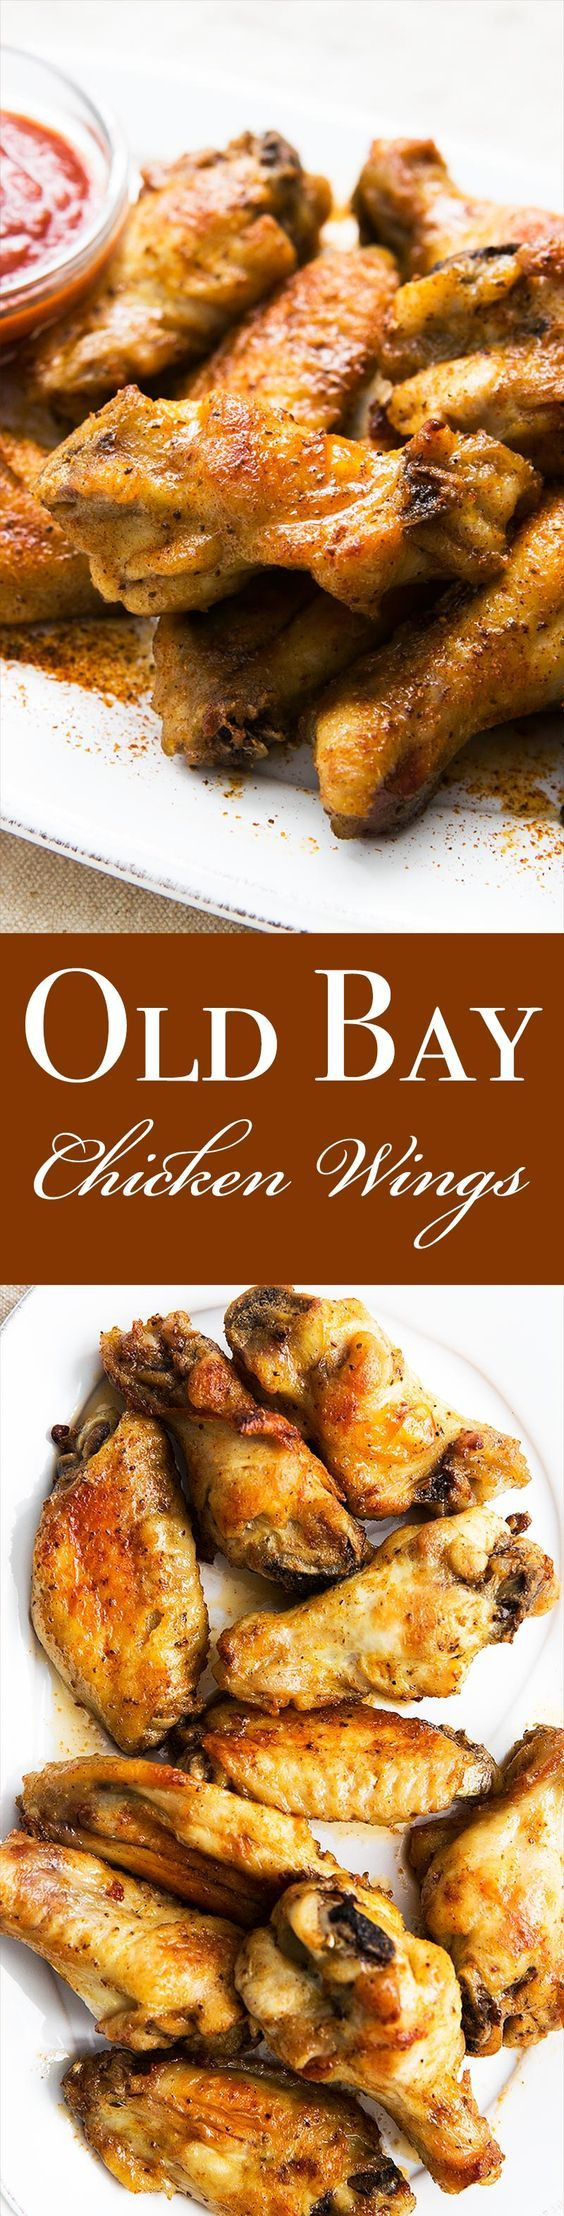 Old Bay Chicken Wings Love Old Bay seasoning It s AWESOME on chicken wings